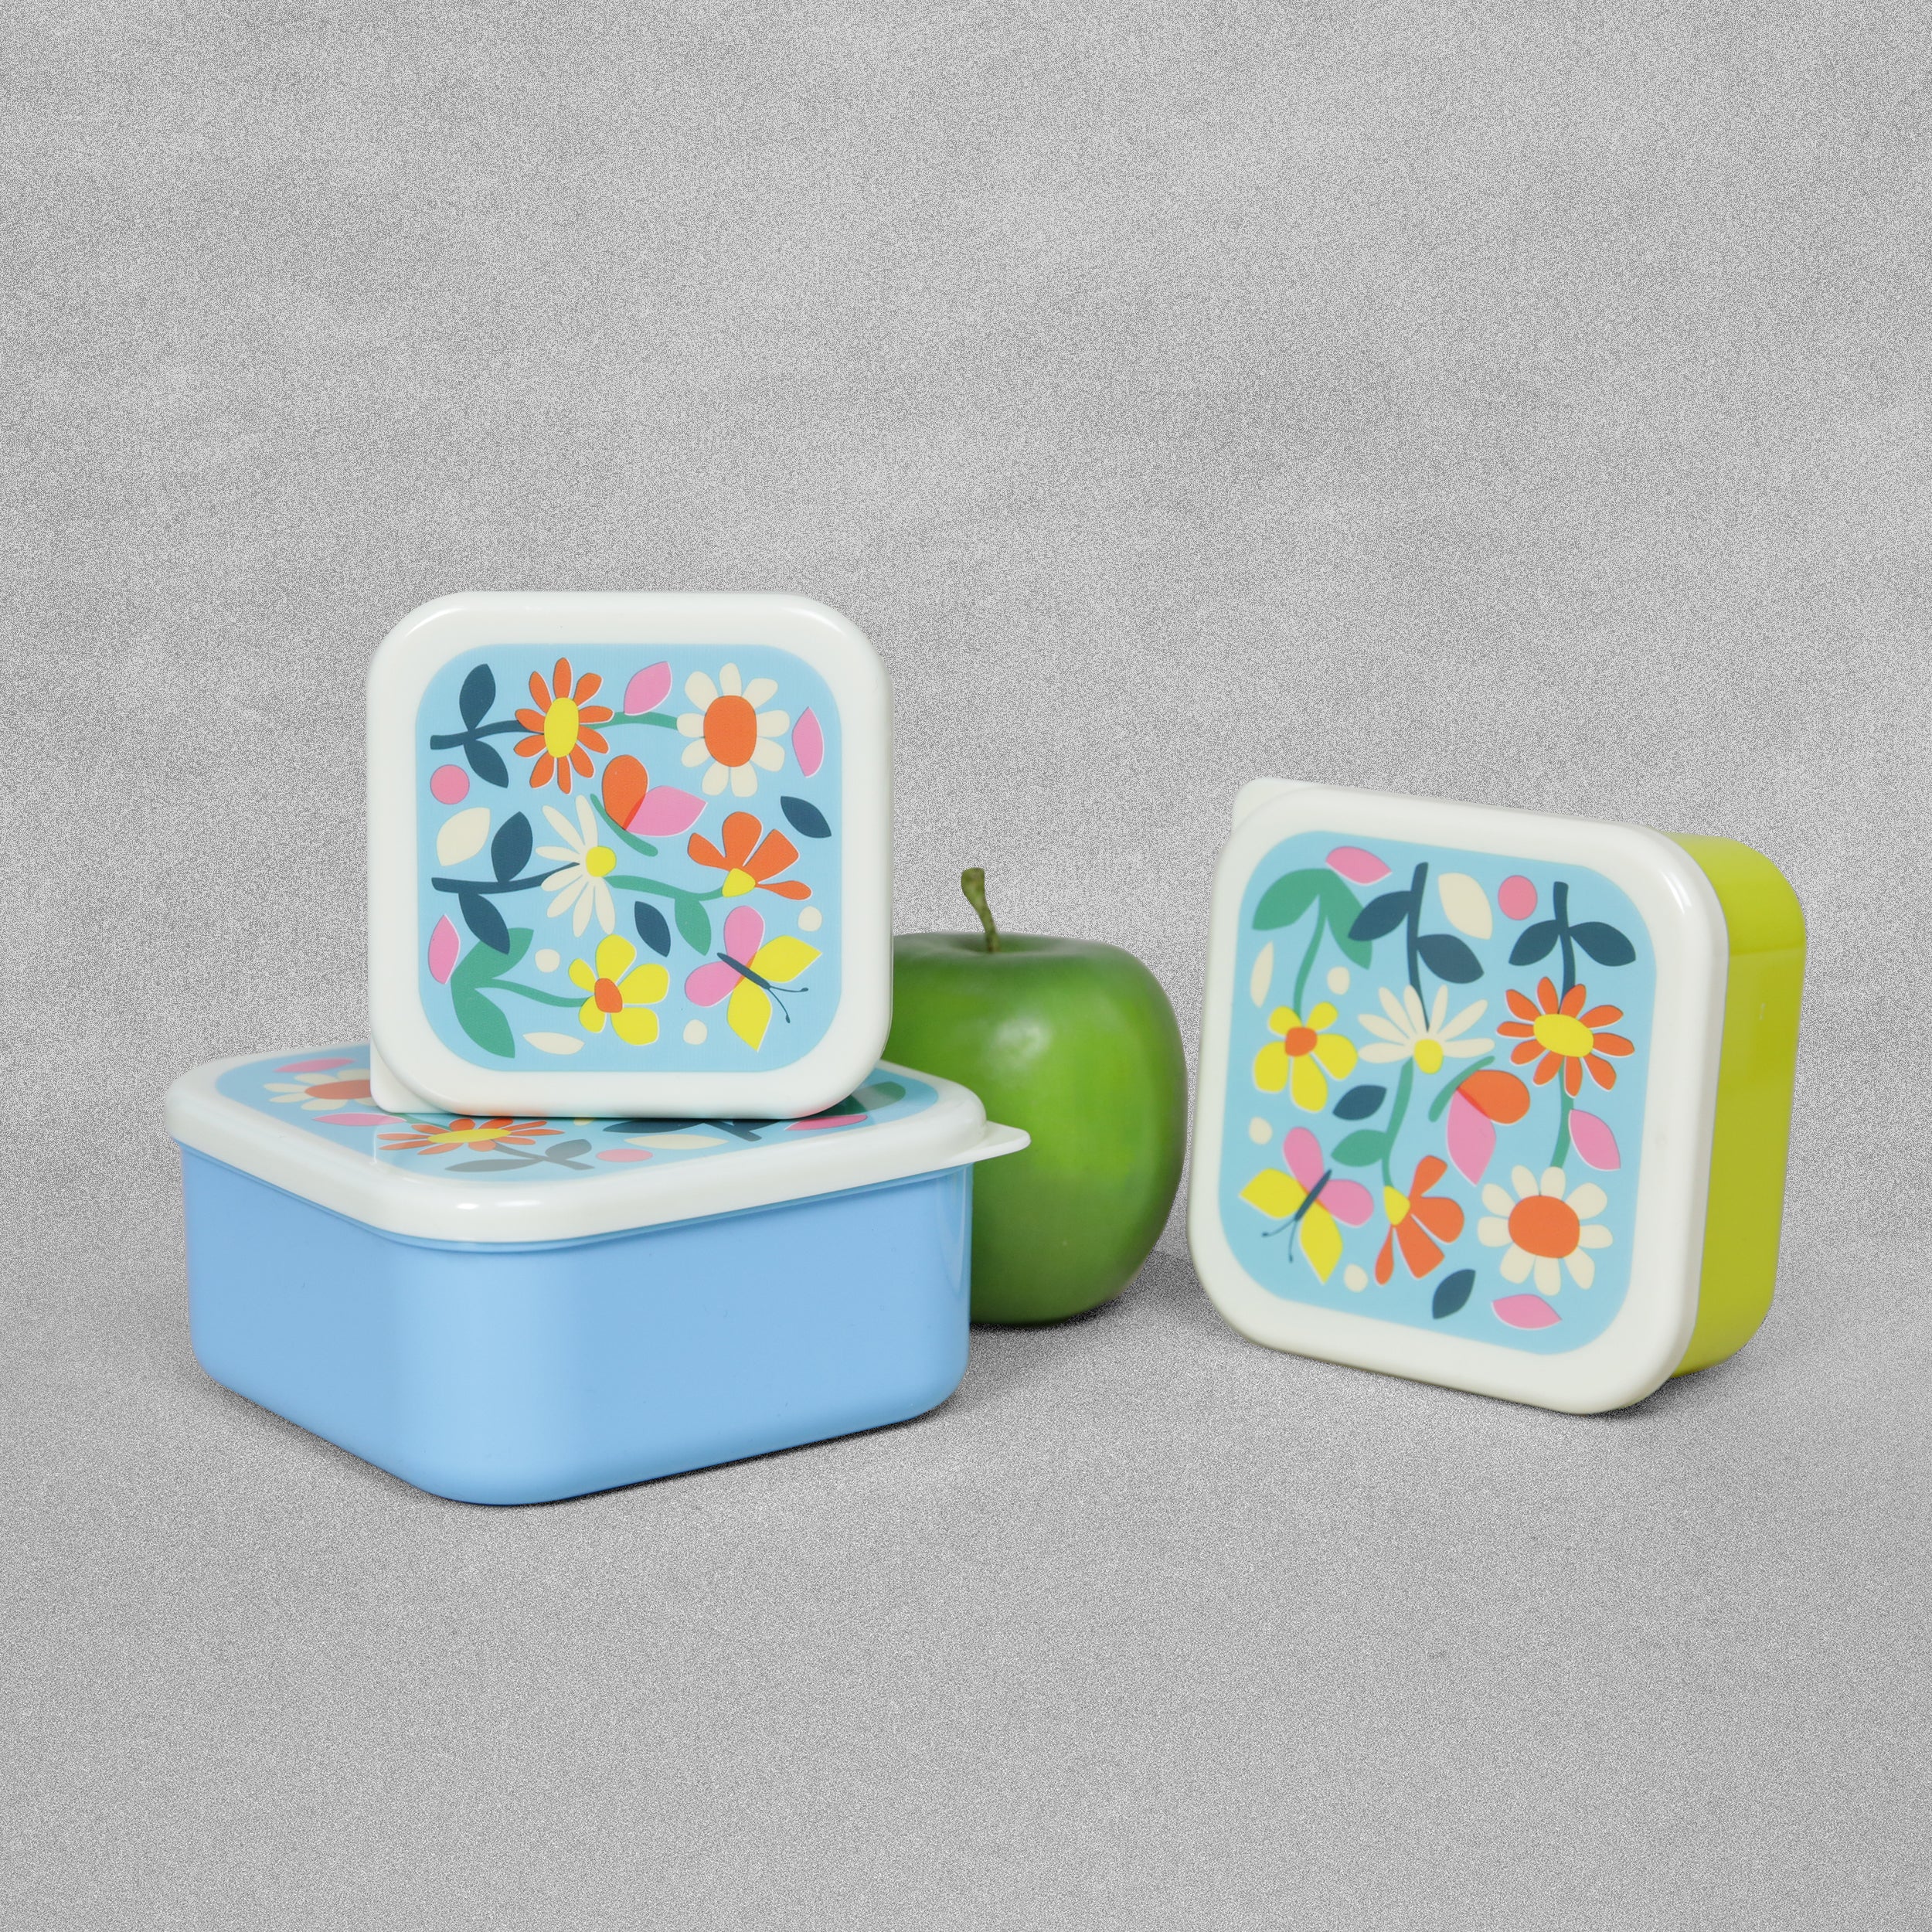 Butterfly Garden Snack Boxes - Set of 3